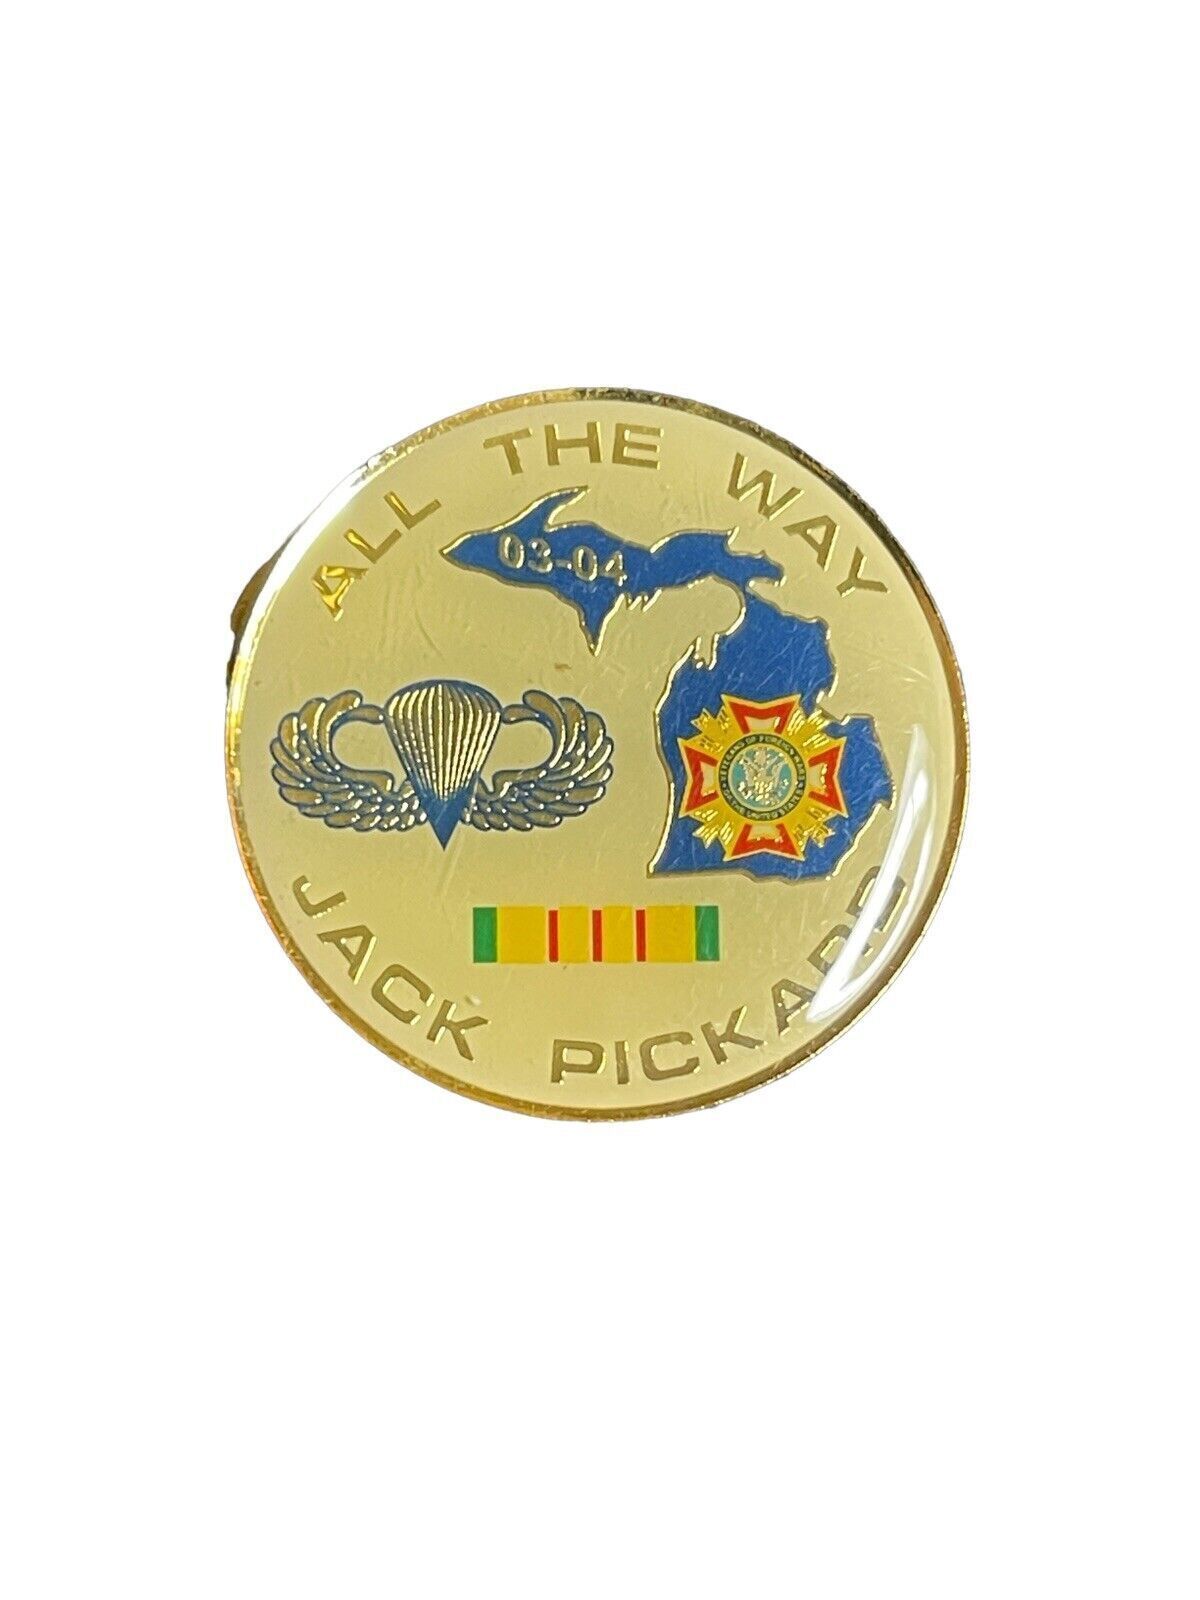 Vintage 2003-04 Veterans of Foreign Wars All the Way Jack Pickard Lapel Pin